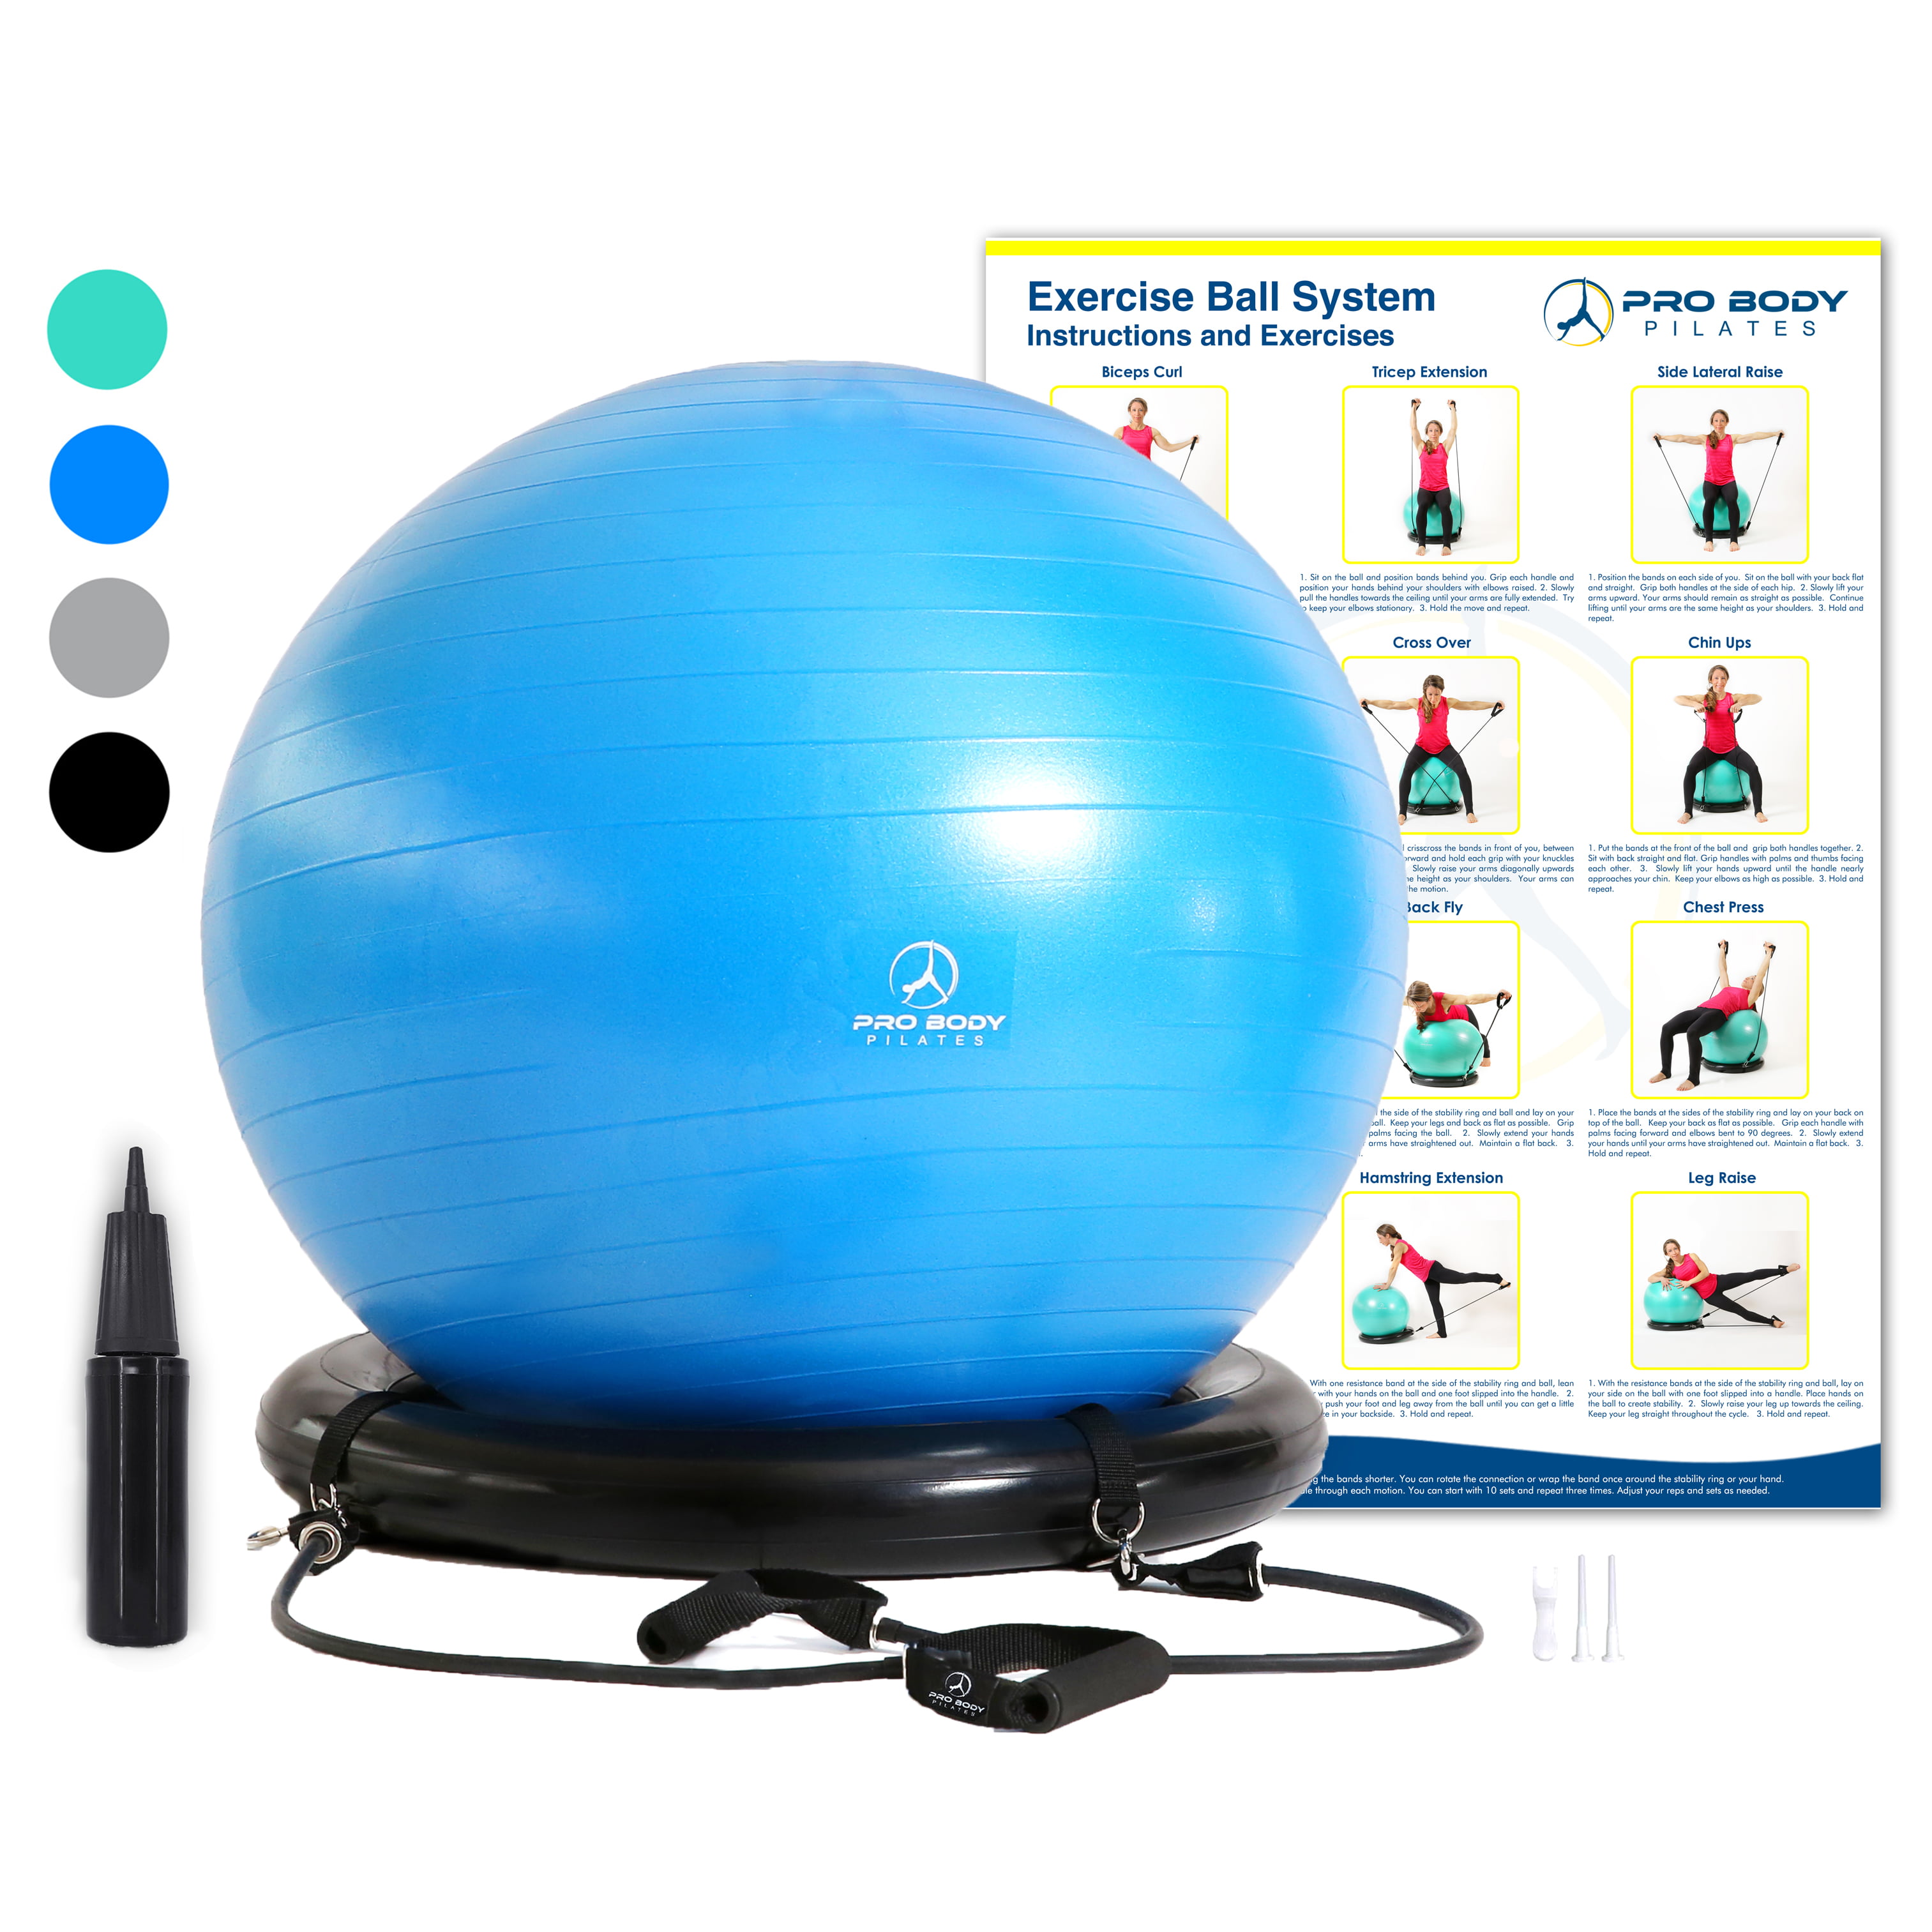 INTENT SPORTS Exercise Ball Chair Office Posture & Balance Stability Yoga Ball with Inflation Pump 65 cm Core Fitness Ball for Home Gym Birthday Ball Improves Back Pain Exercise Videos 